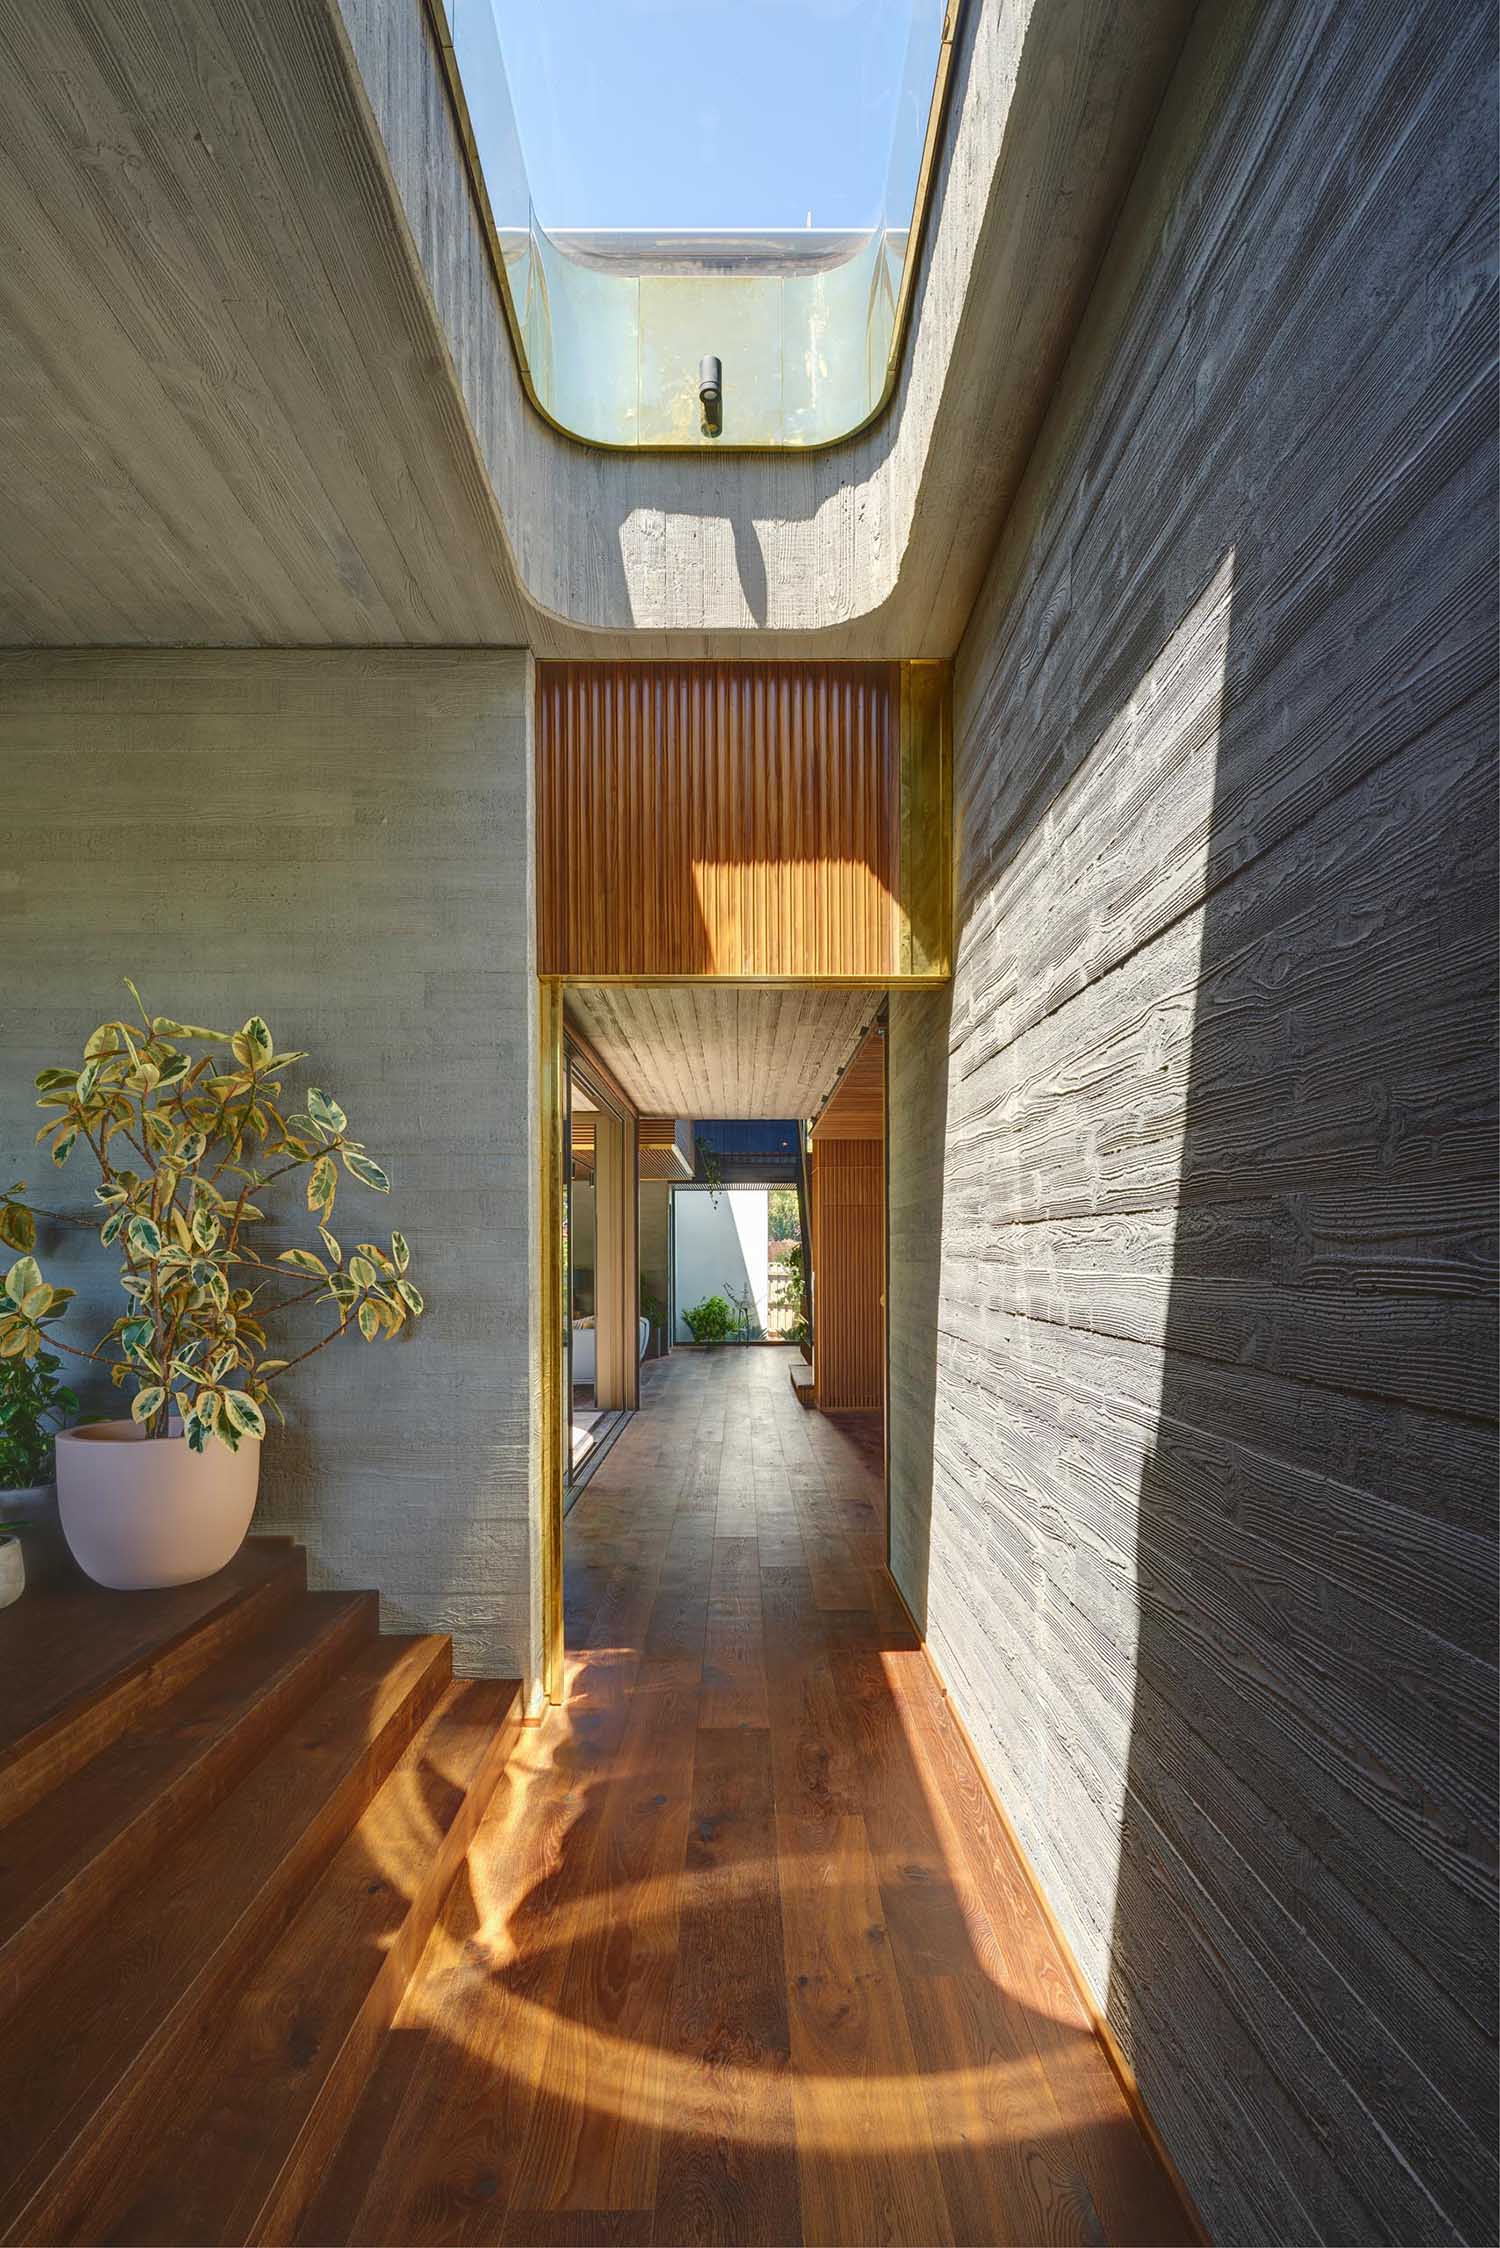 A modern home with wood and brass detailing and board-formed concrete walls.